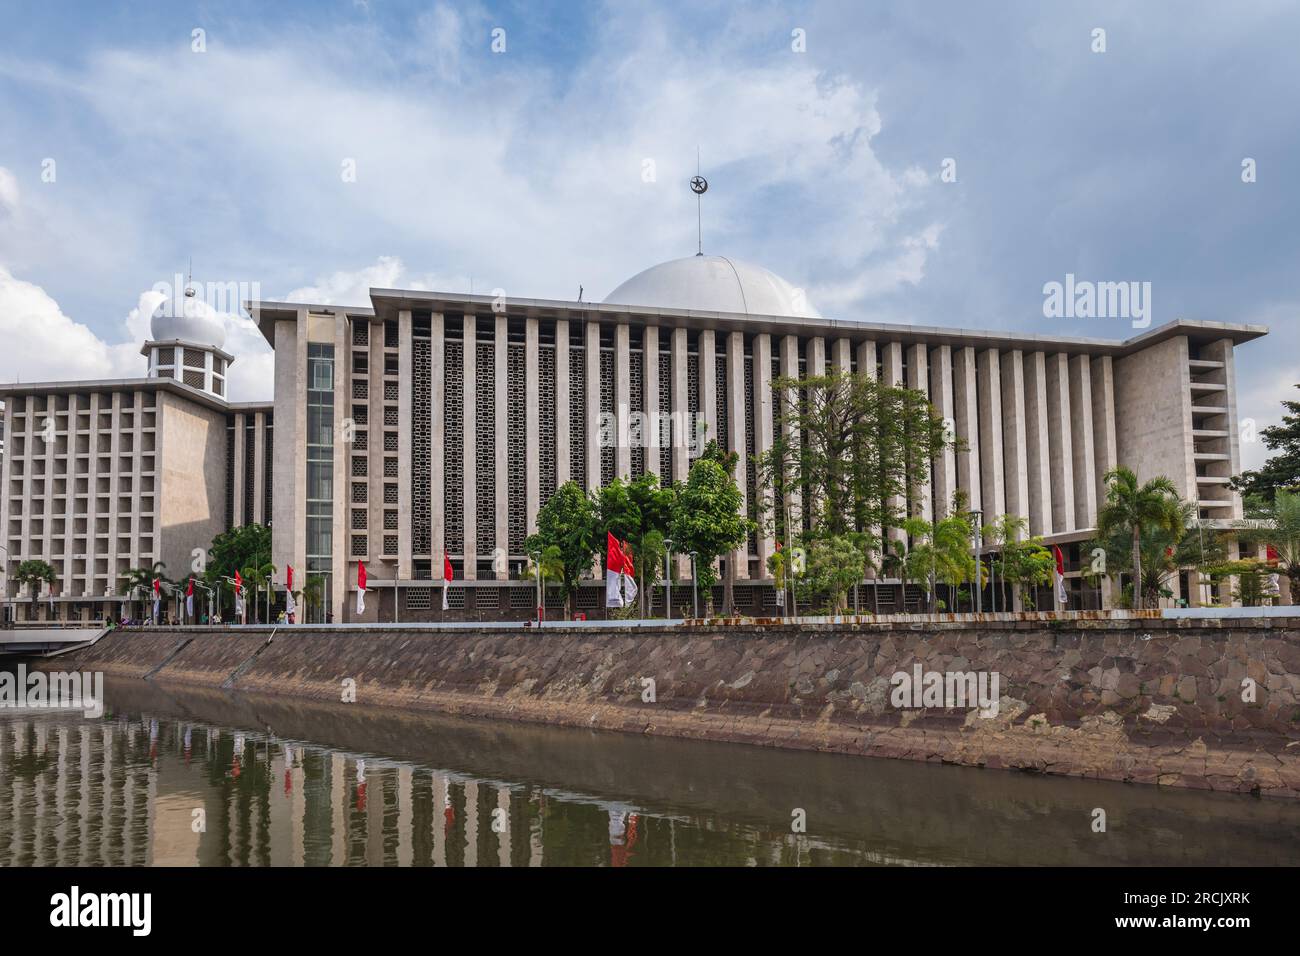 Masjid Istiqlal, Independence Mosque, located at center of Jakarta in Indonesia Stock Photo